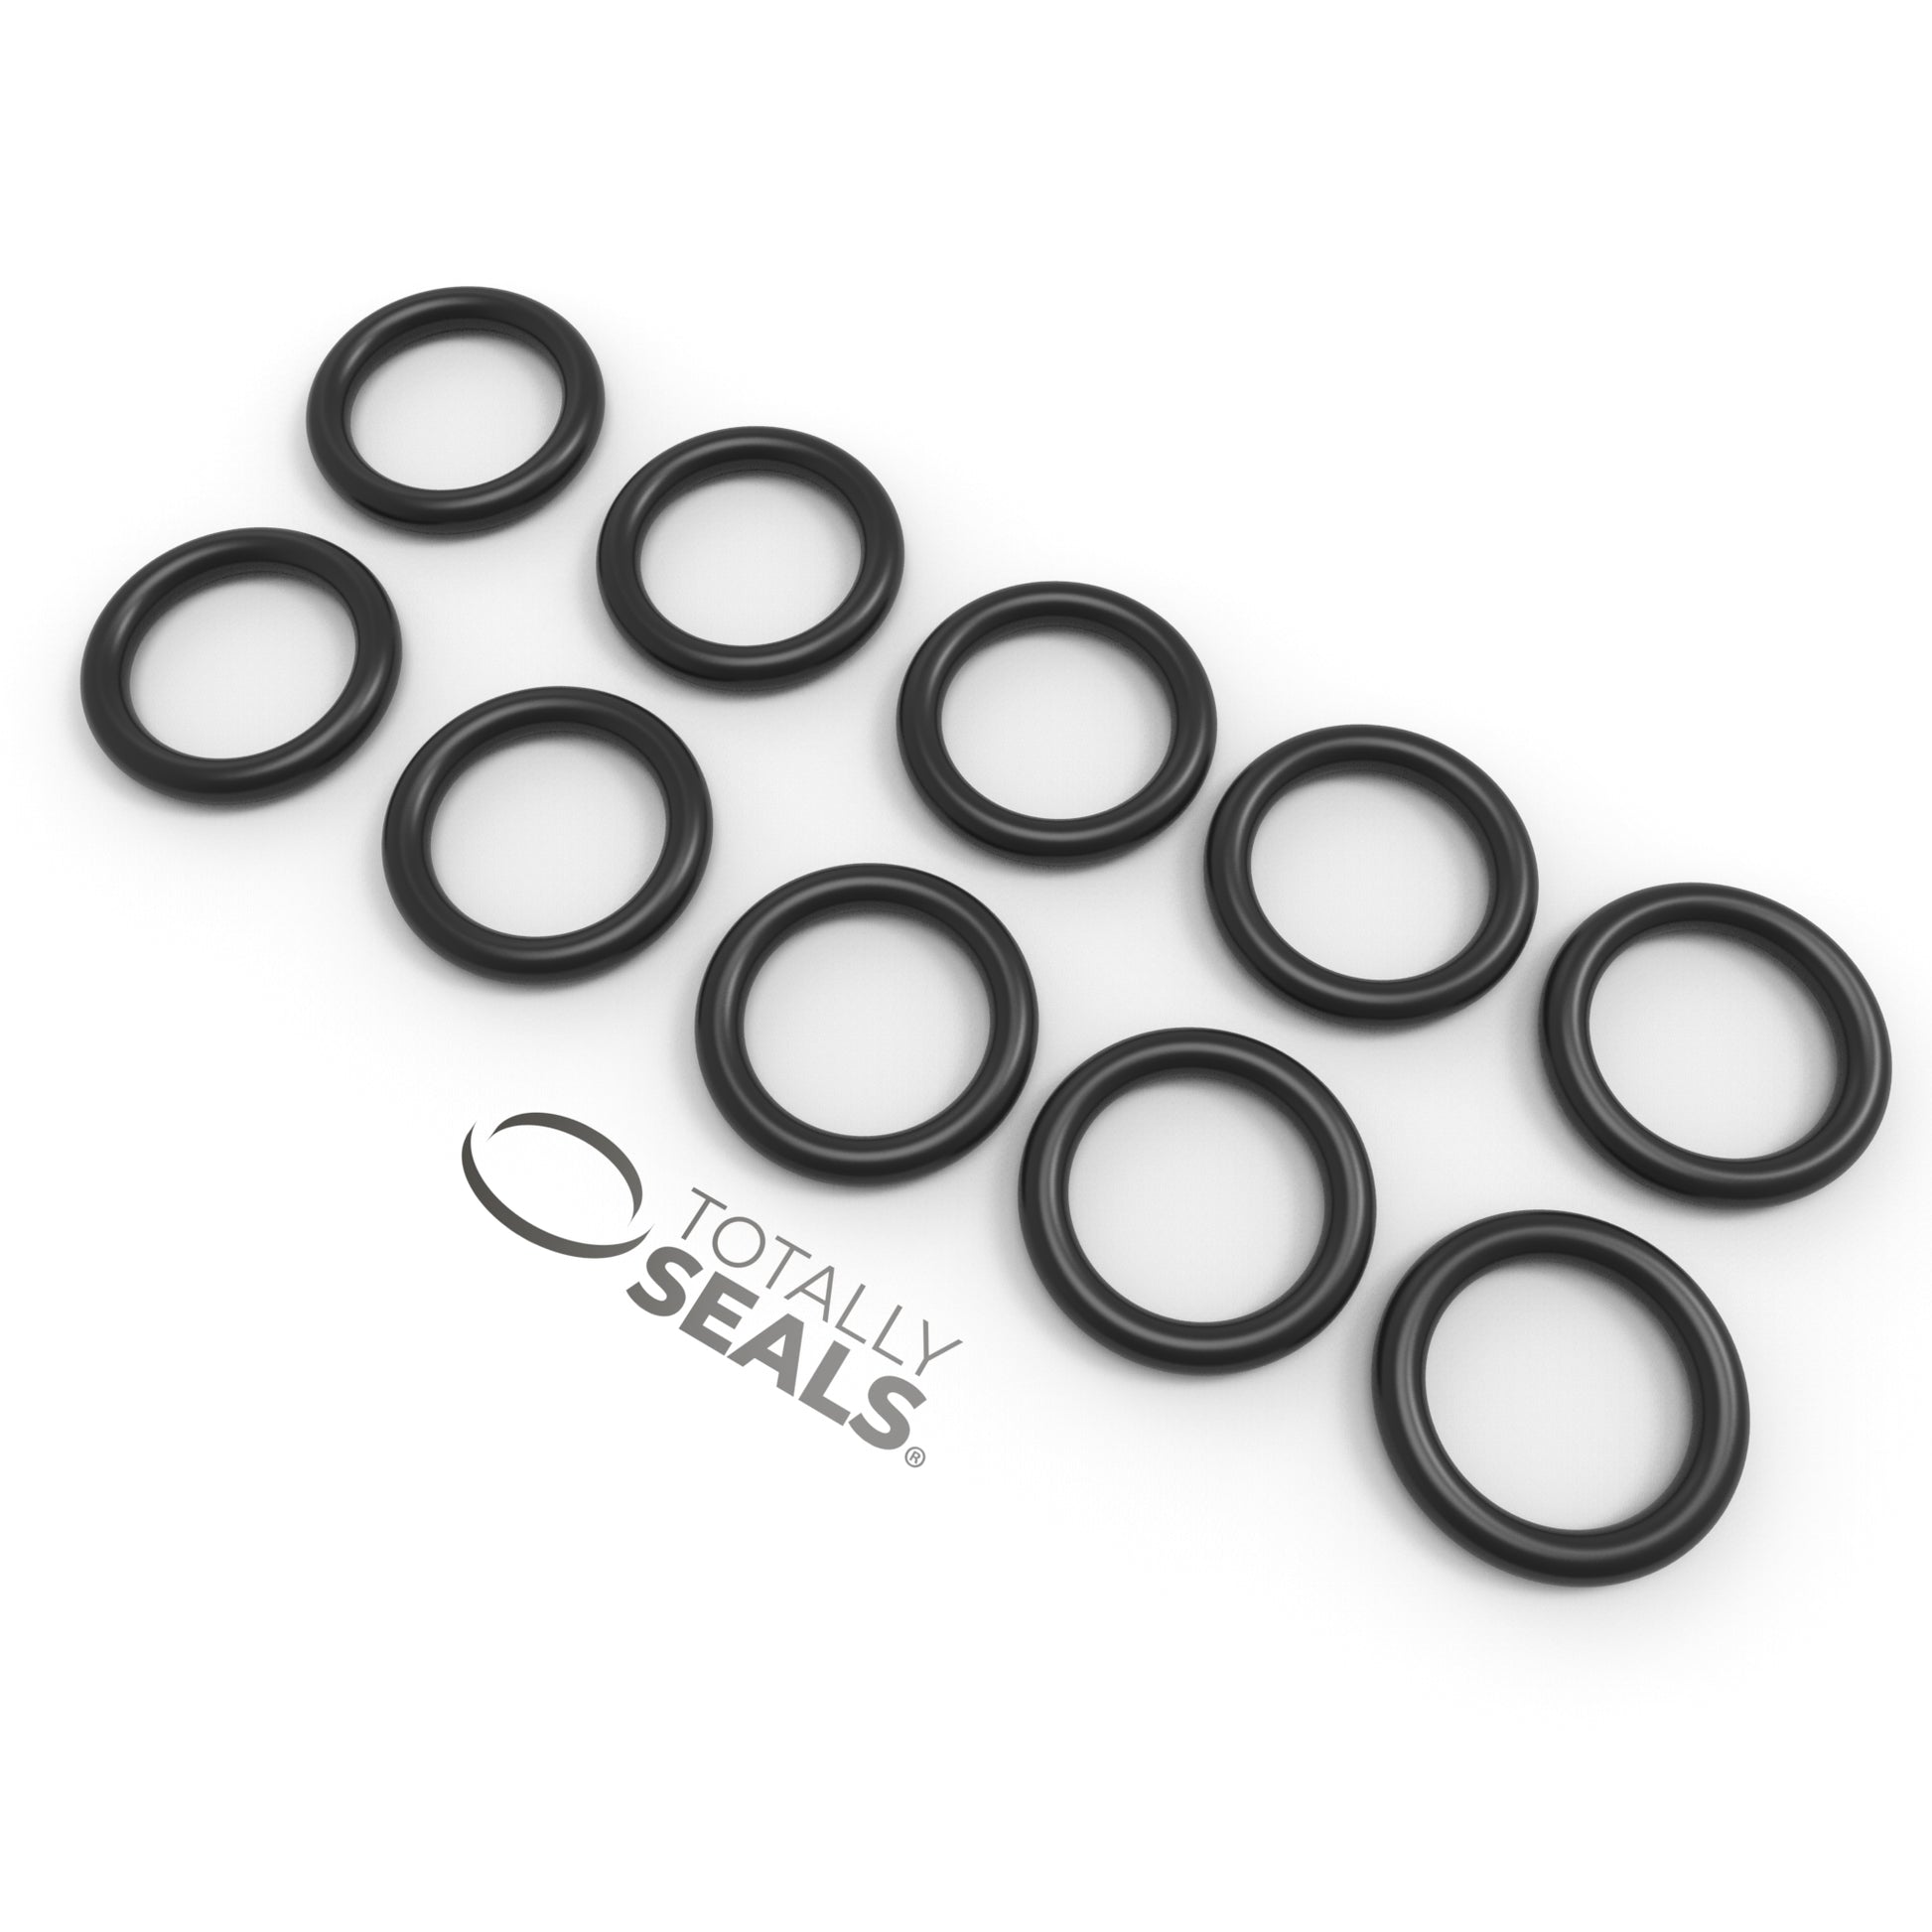 70mm x 5mm (80mm OD) Nitrile O-Rings - Totally Seals®